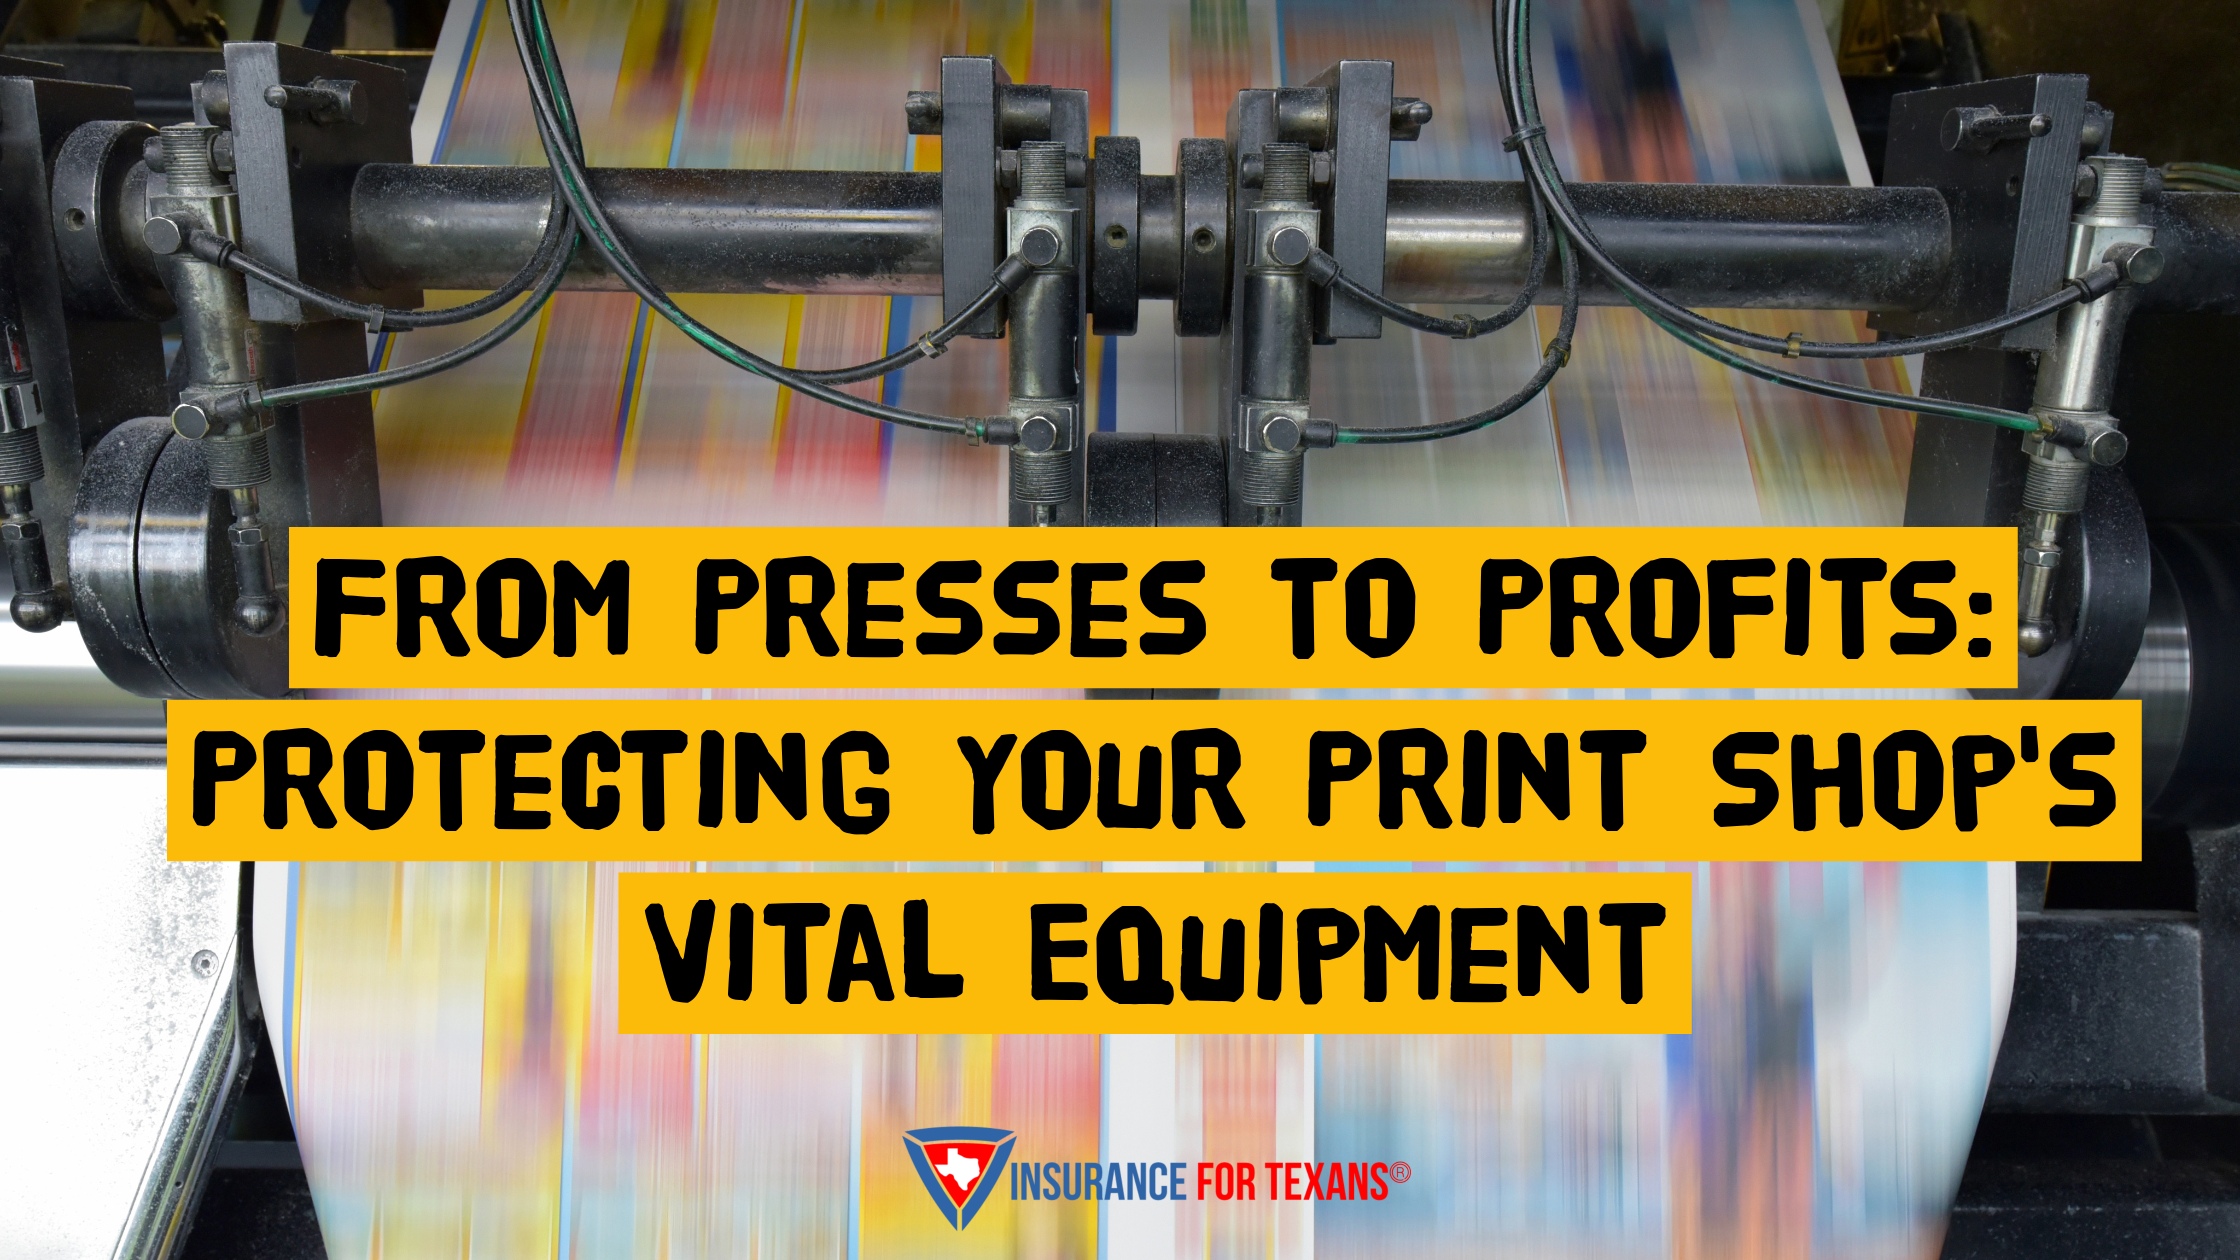 Protecting Your Print Shop's Vital Equipment